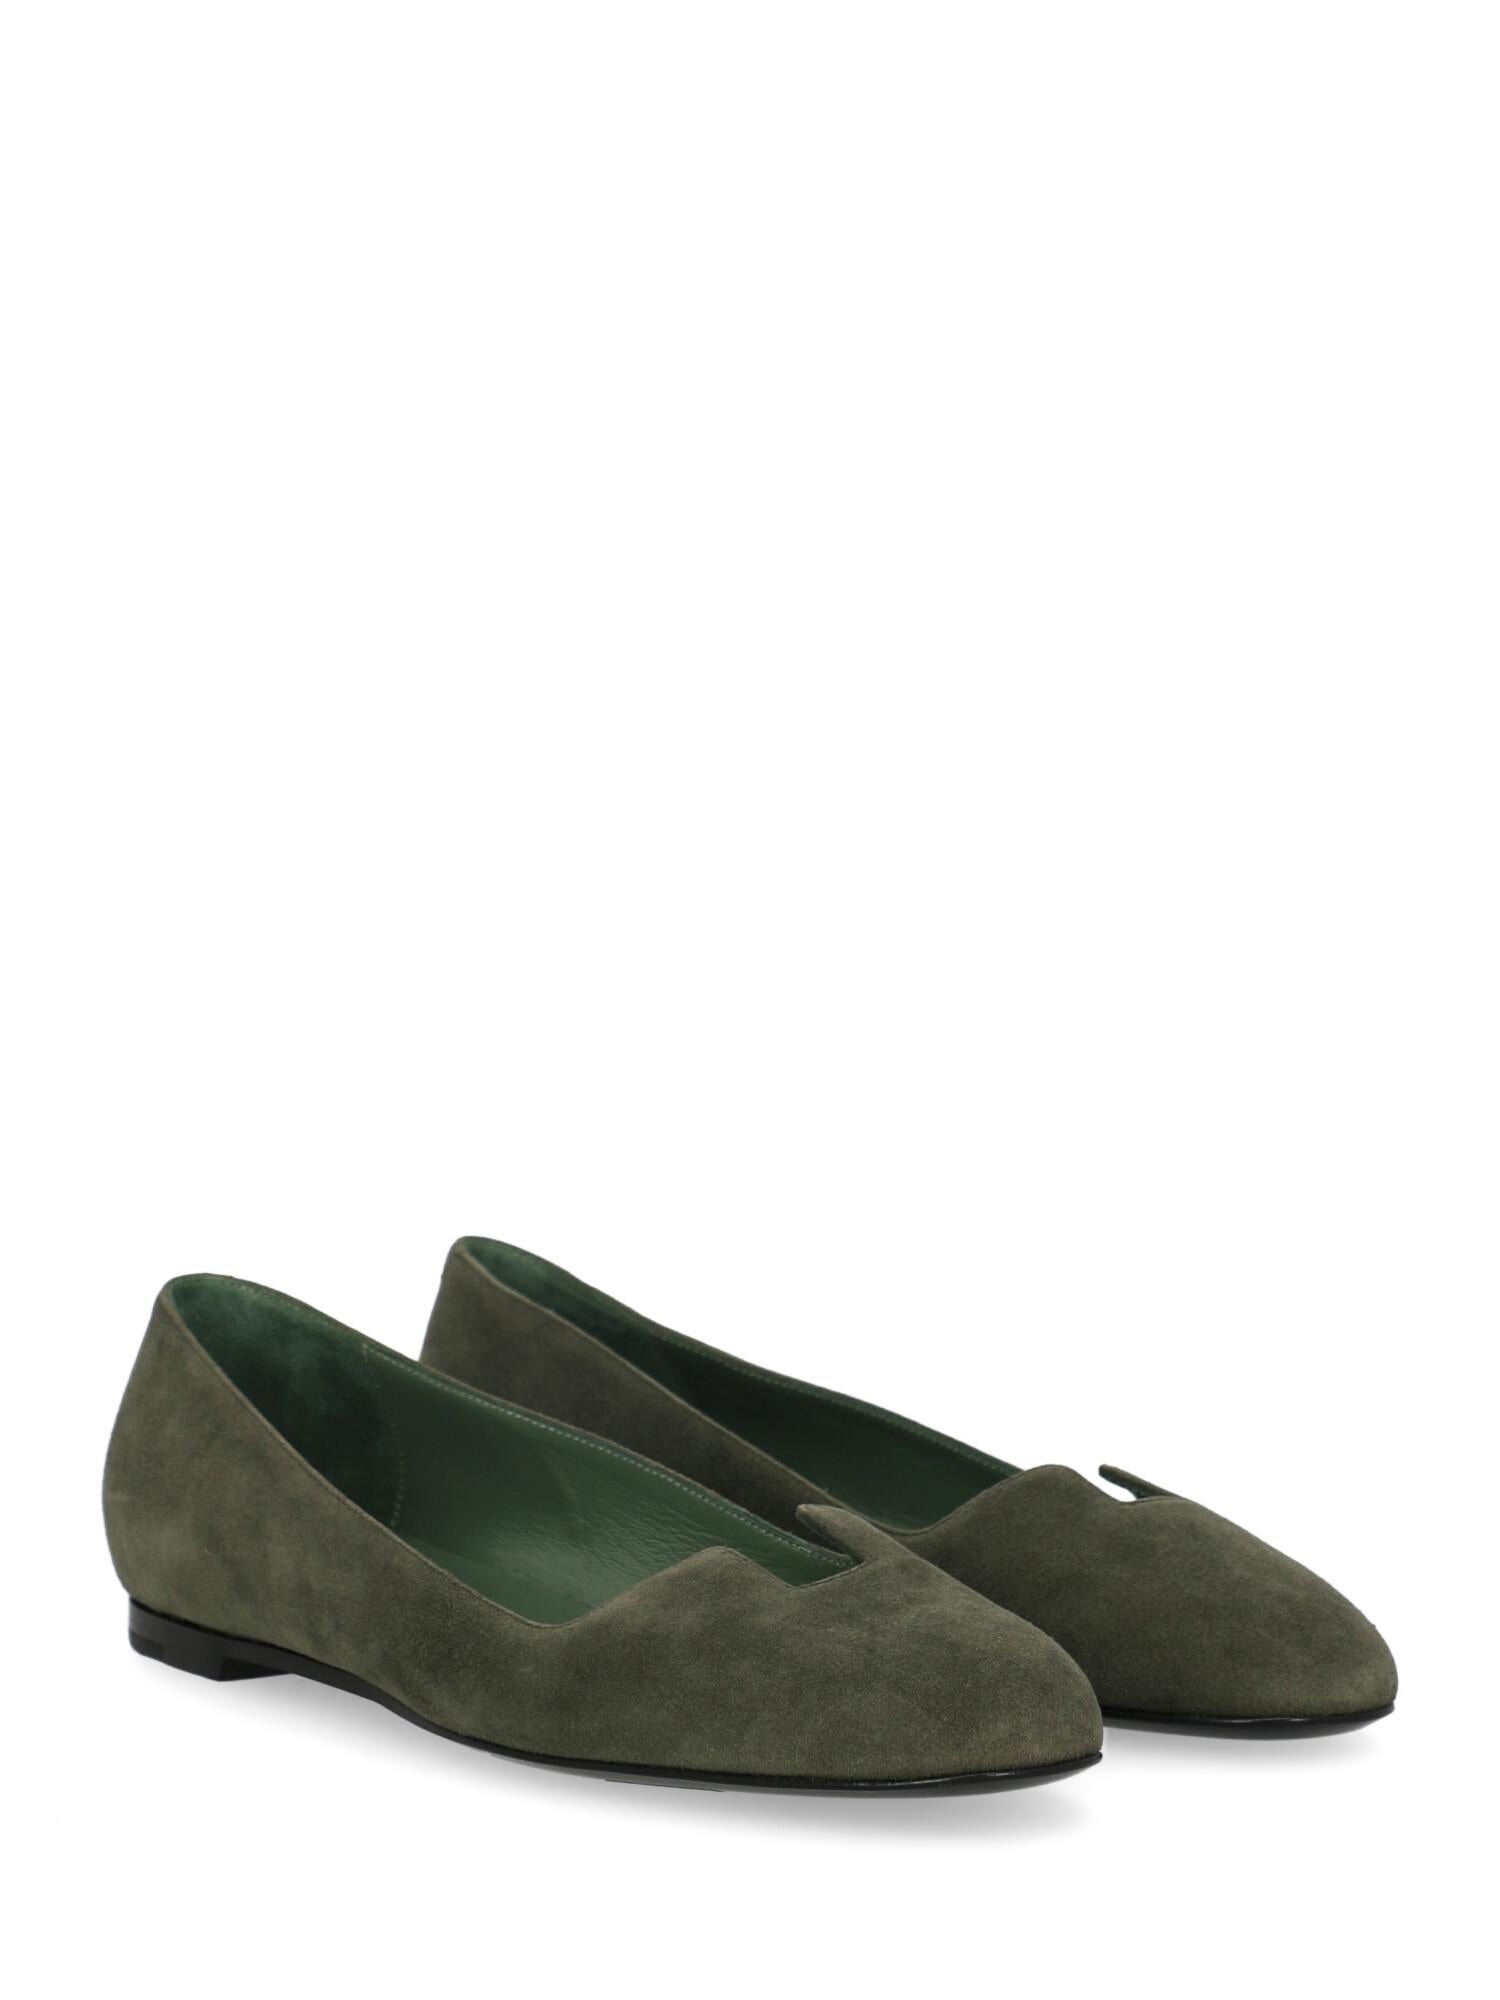 Shoe, leather, solid color, internal logo, suede

Includes:
N/A

Product Condition: Excellent
Upper: negligible abrasions.

Measurements:
N/A

Composition:
Upper: 100% Leather
Sole: 100% Leather
Lining: 100% Leather

Color: Green
Product ID: